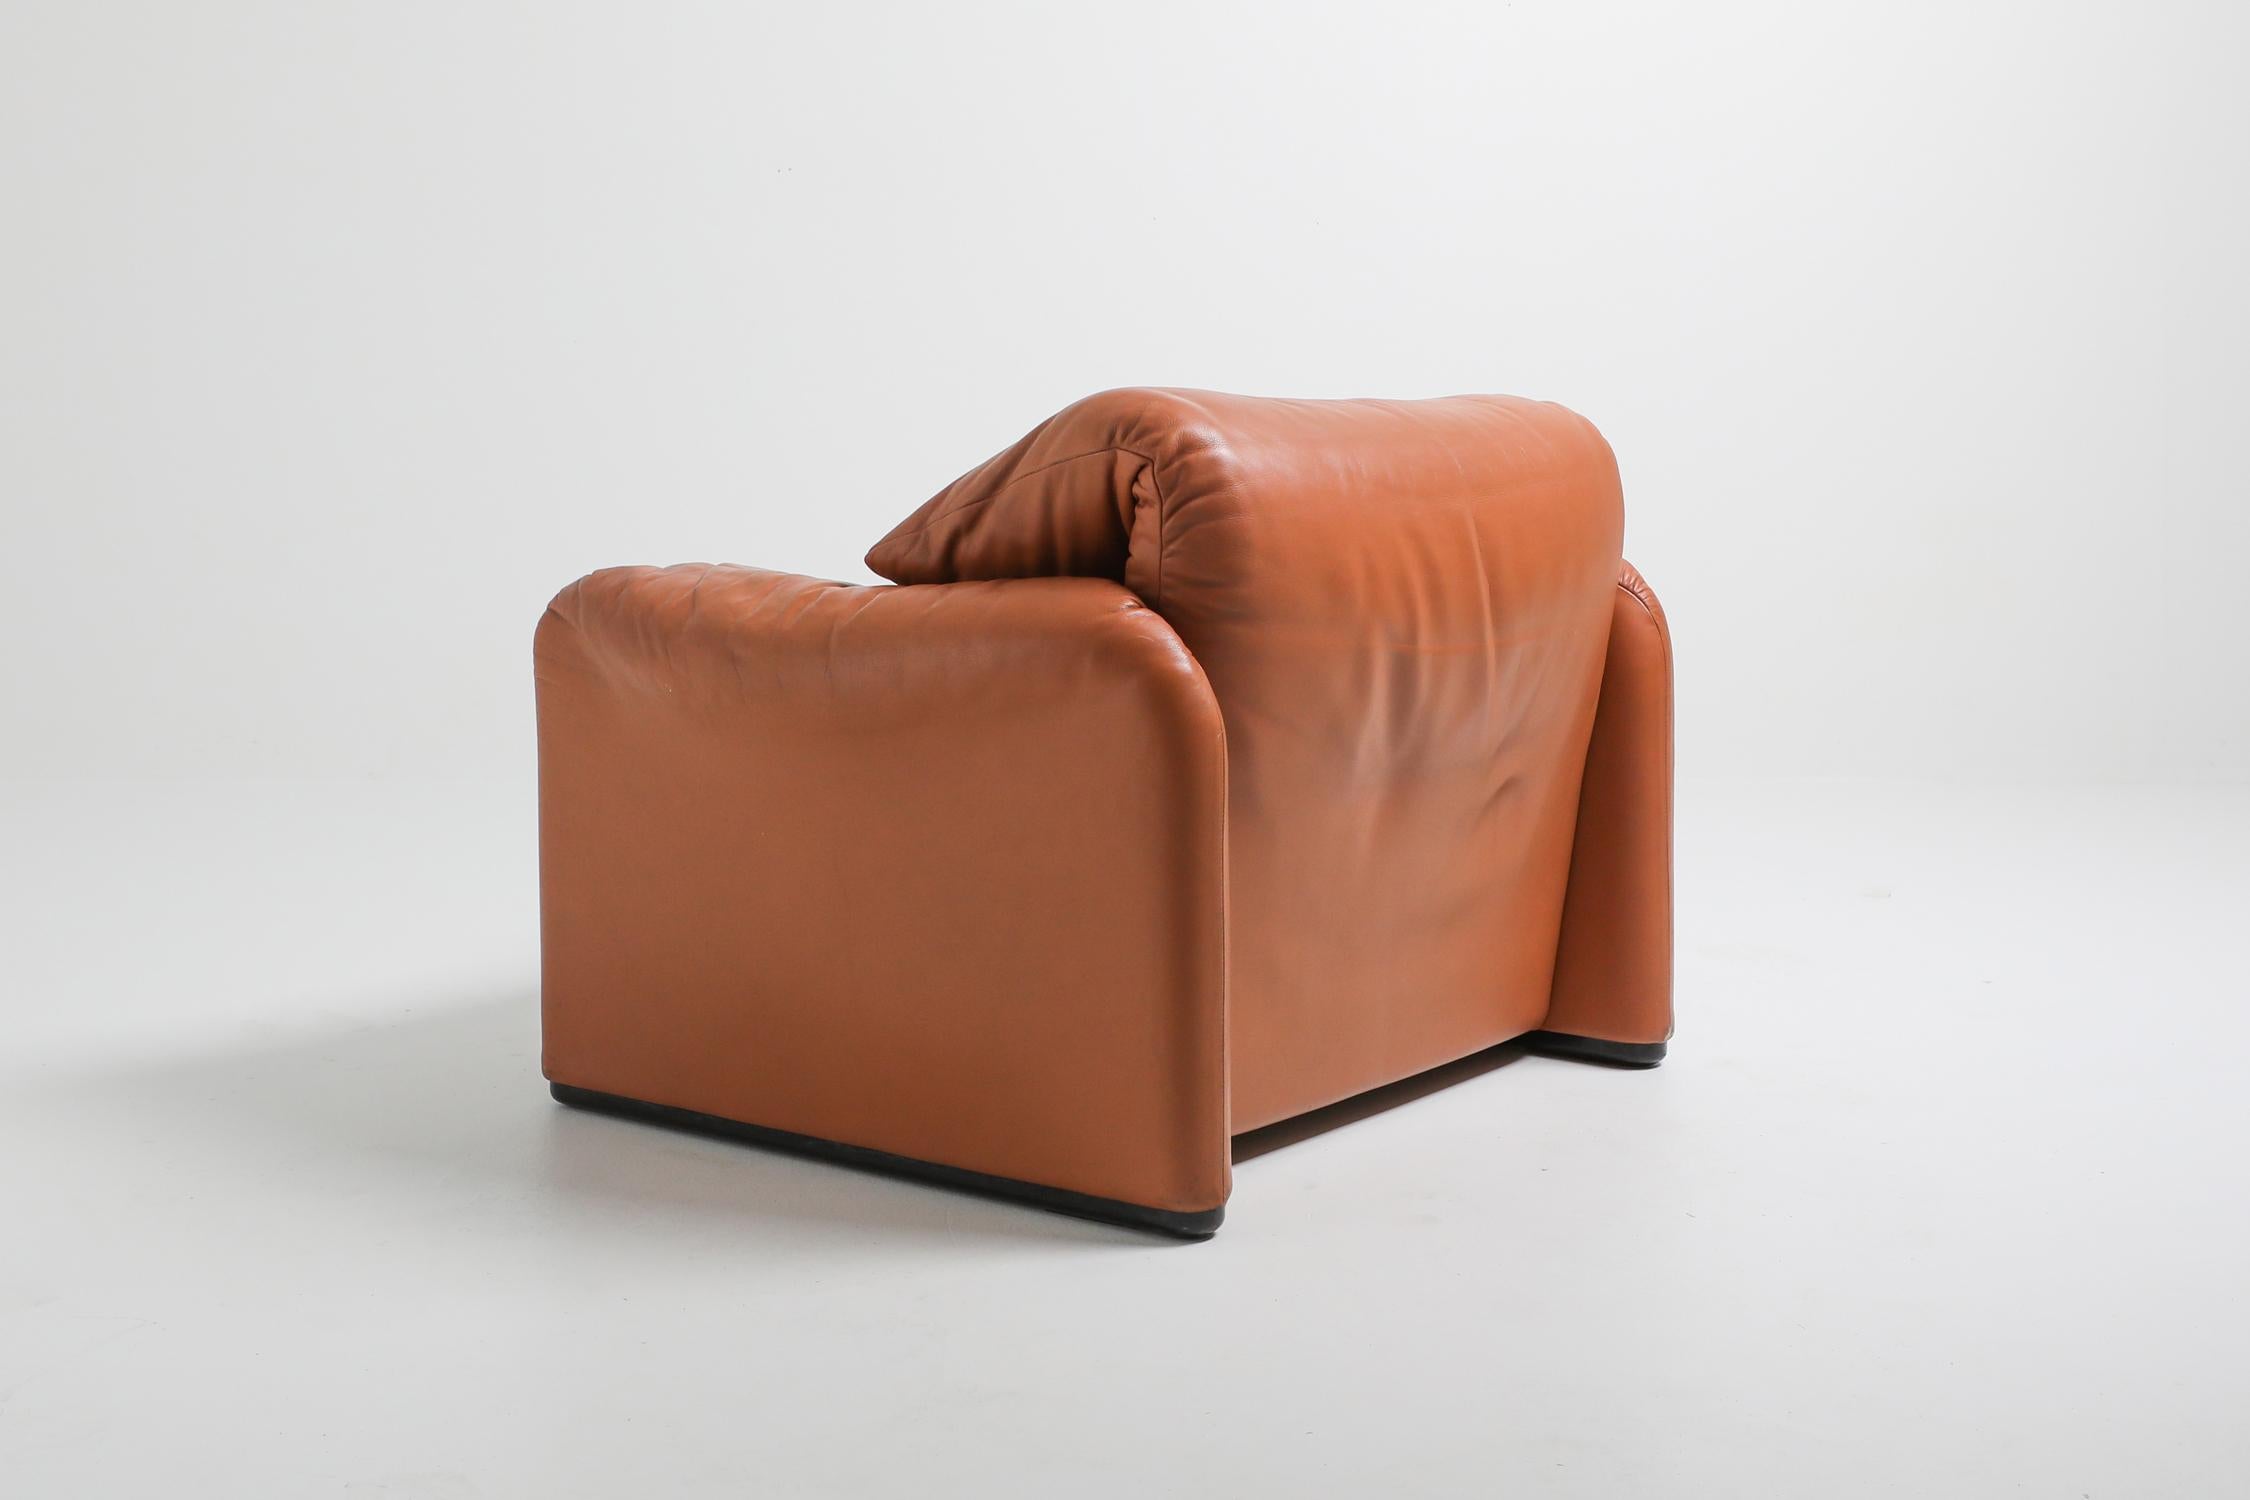 Leather Maralunga Cognac Chairs by Vico Magistretti for Cassina, 1974